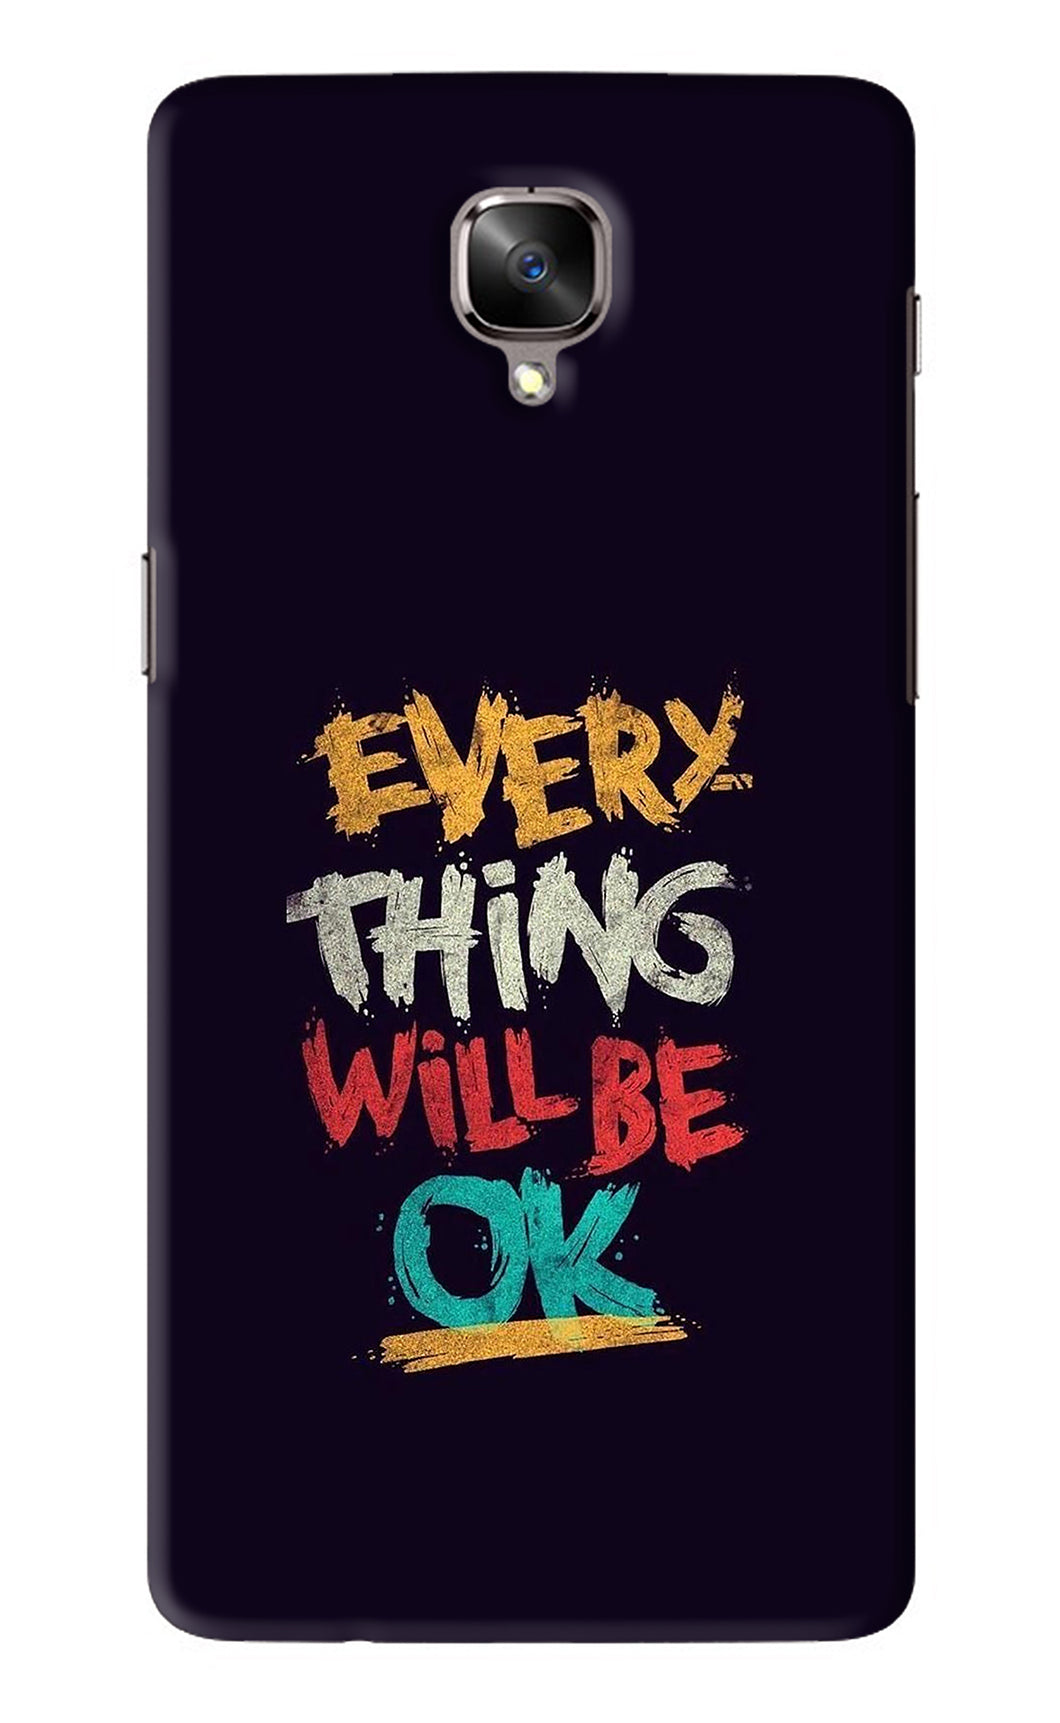 Everything Will Be Ok OnePlus 3T Back Skin Wrap